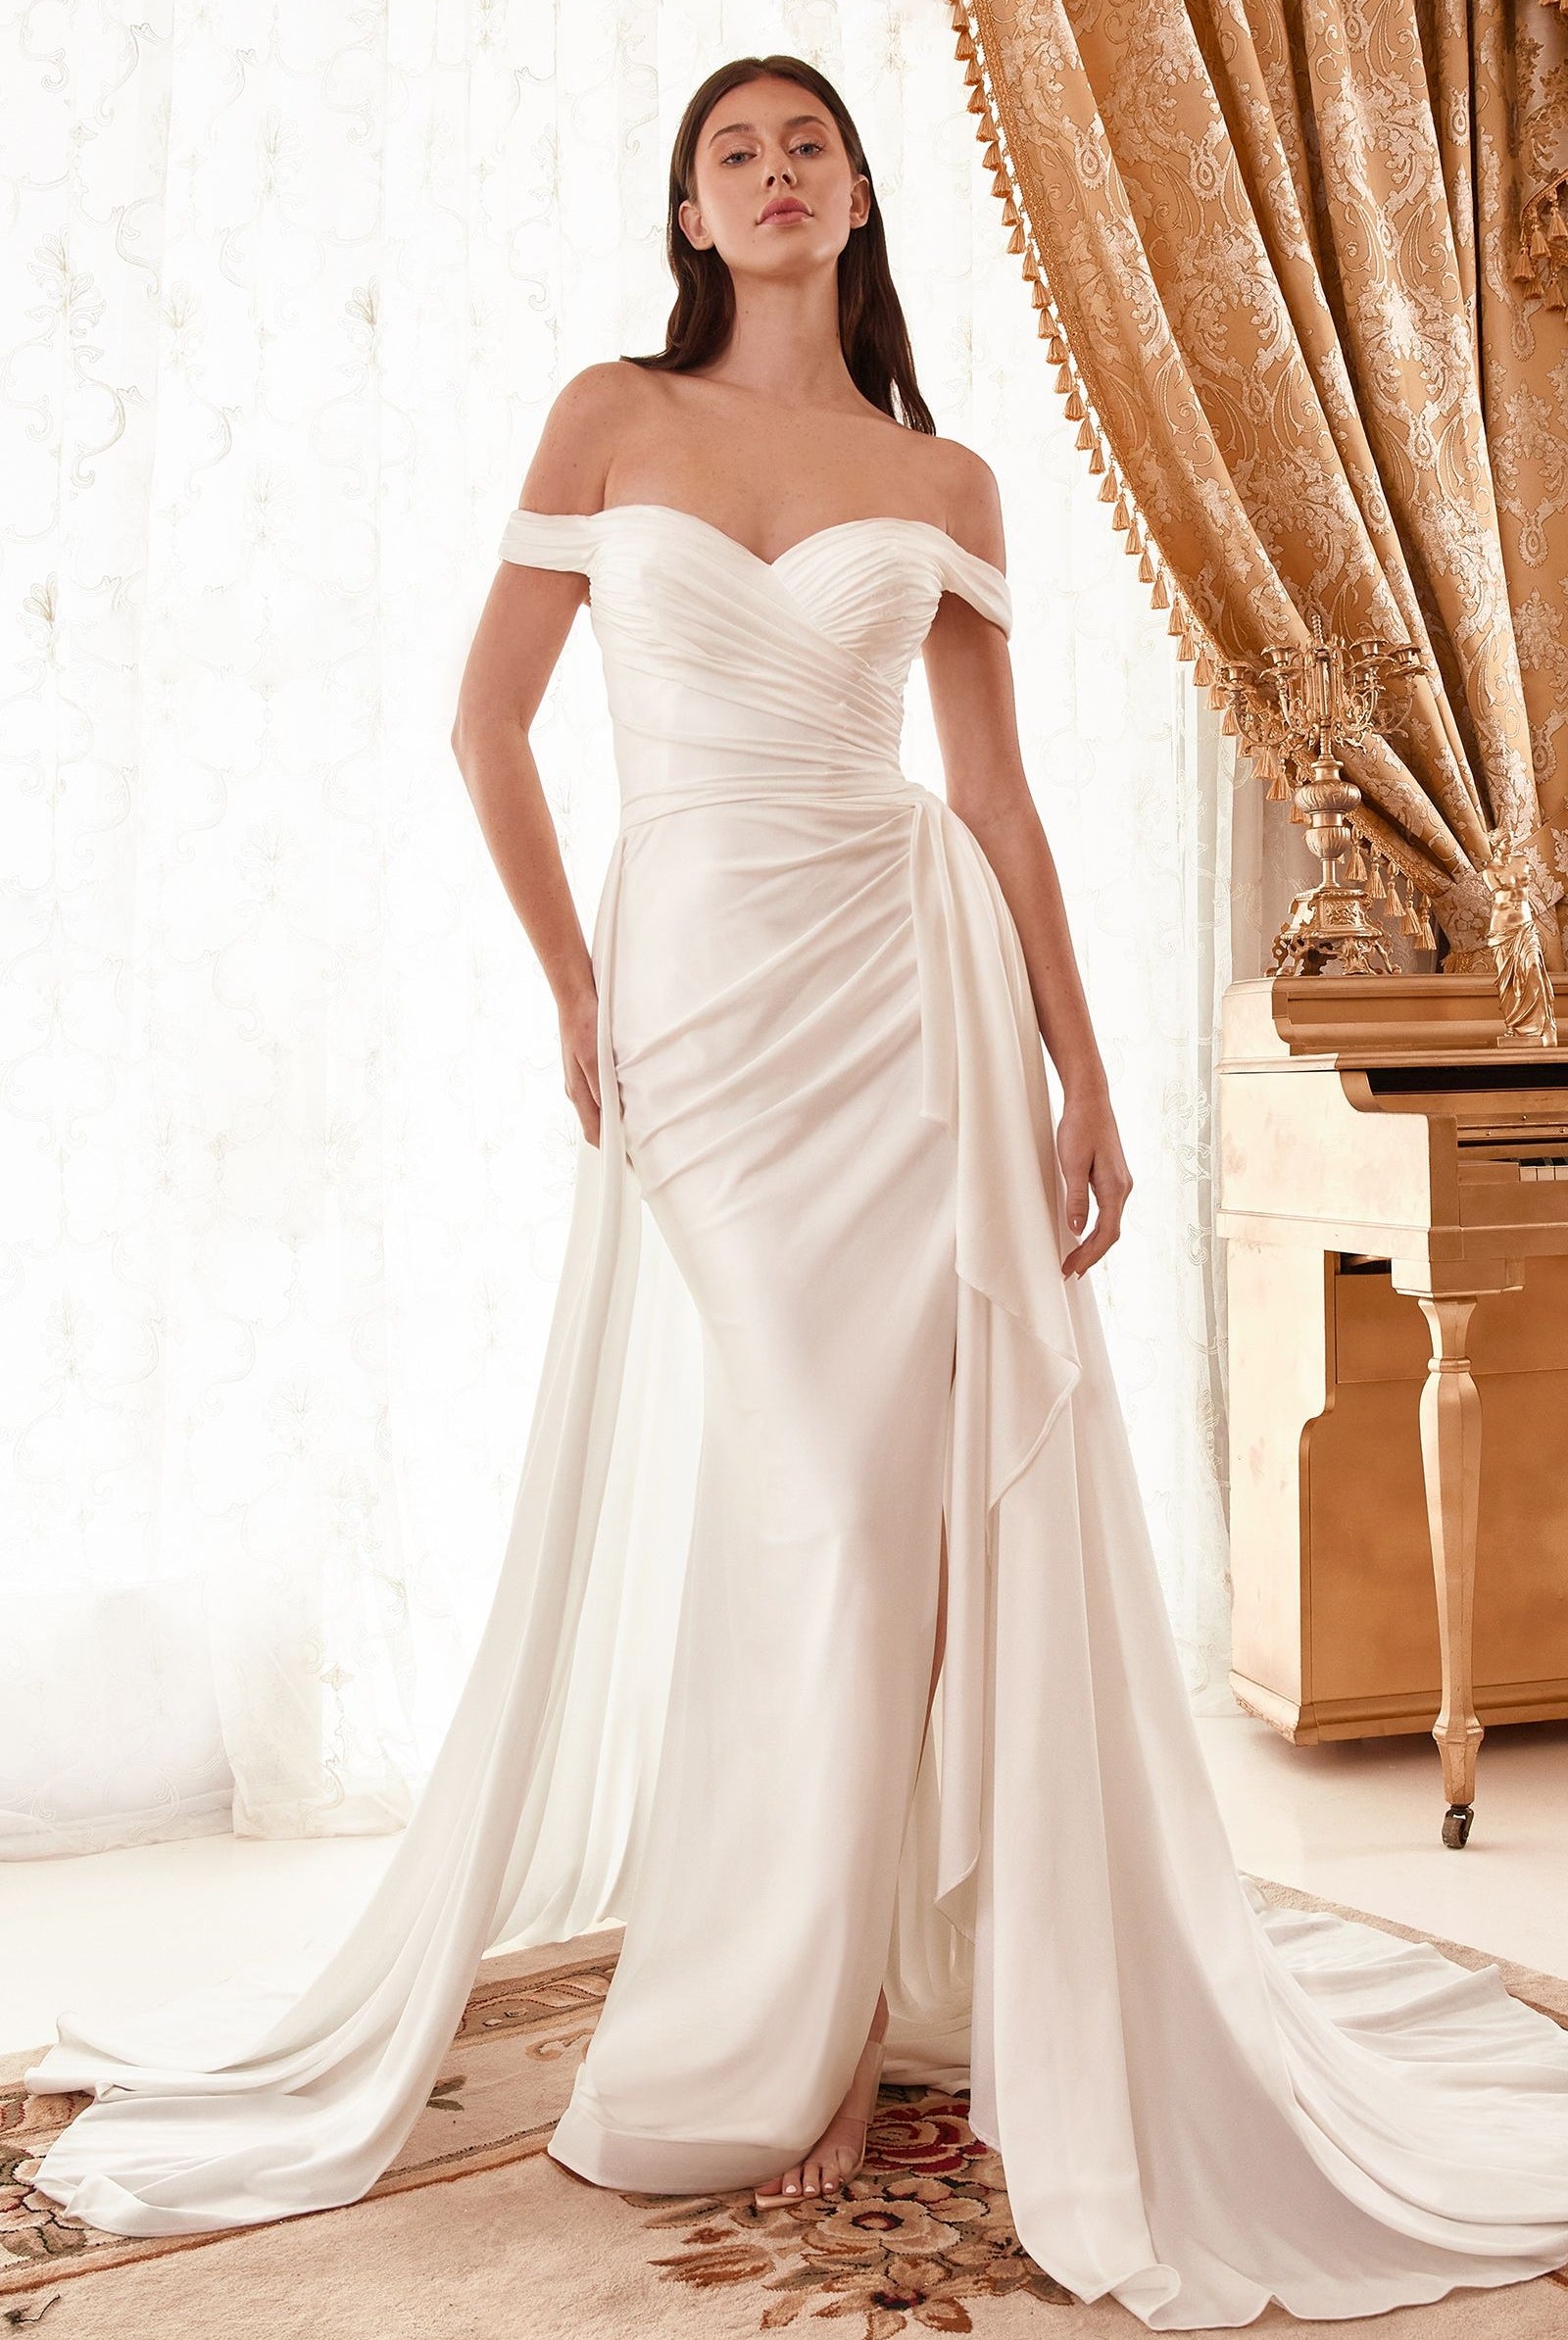 Bridal gown with overskirt